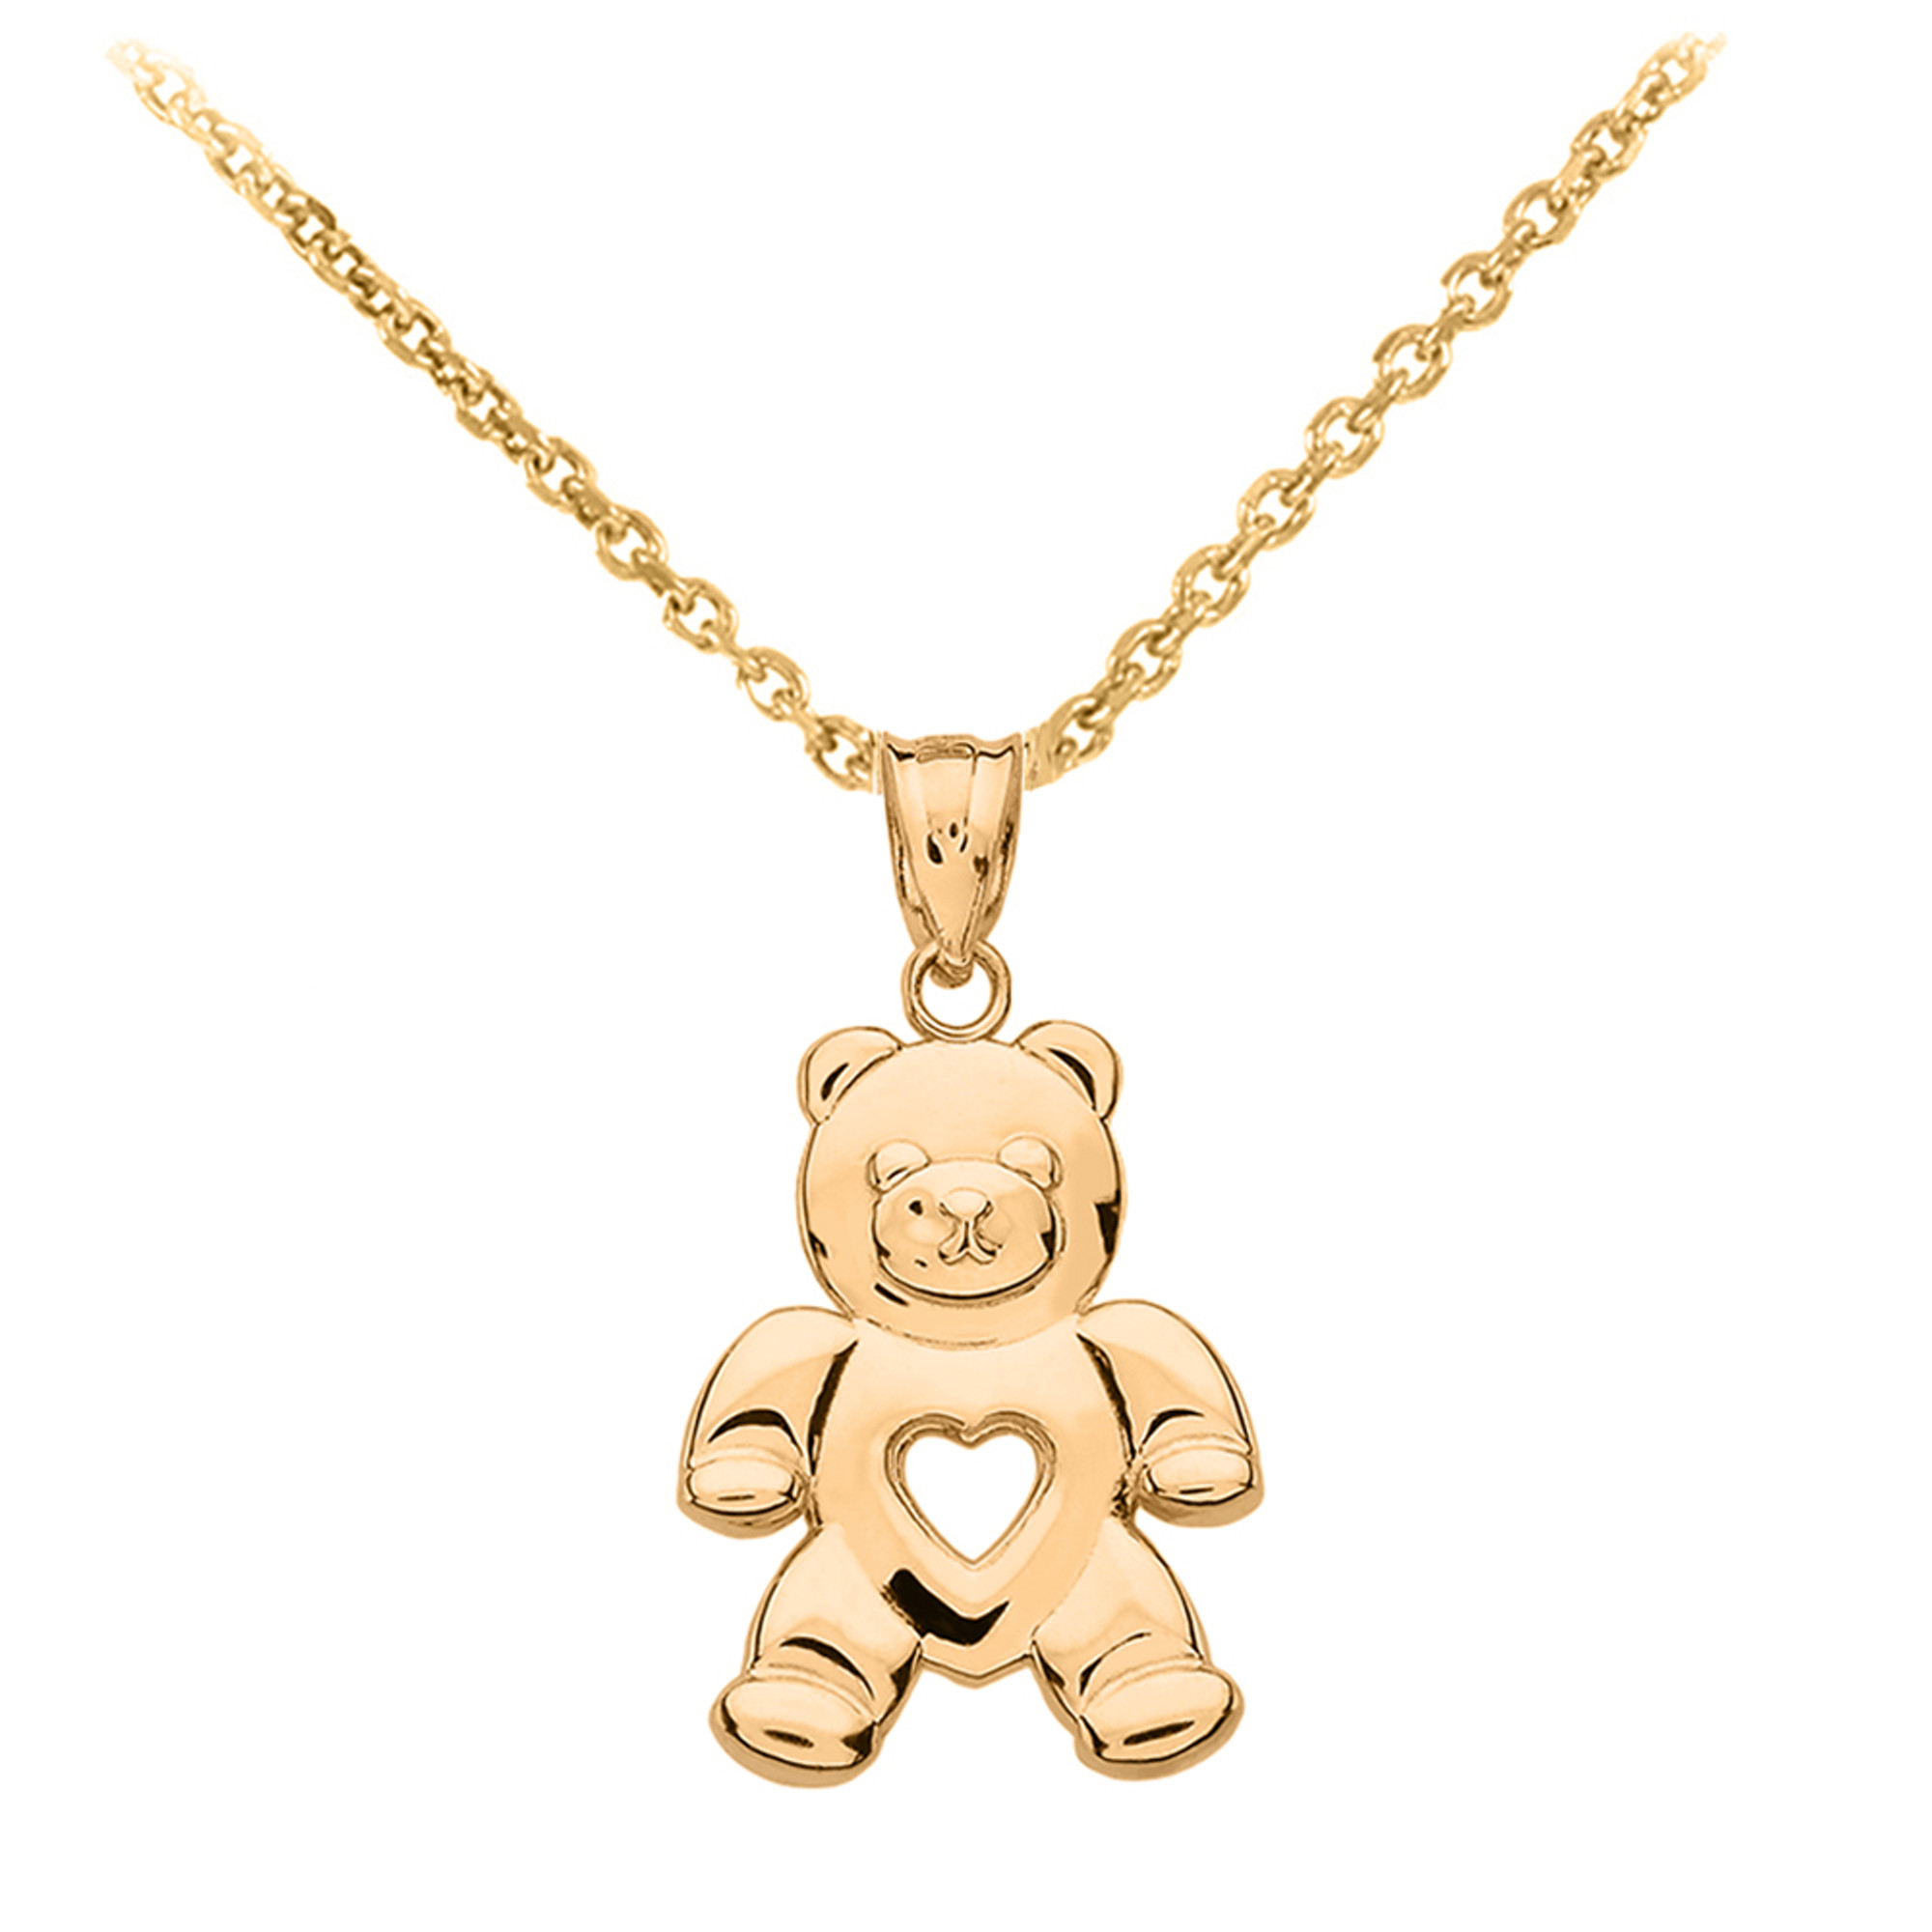 Vintage Offensive Bear Necklace Fashion Jewelry| Alibaba.com